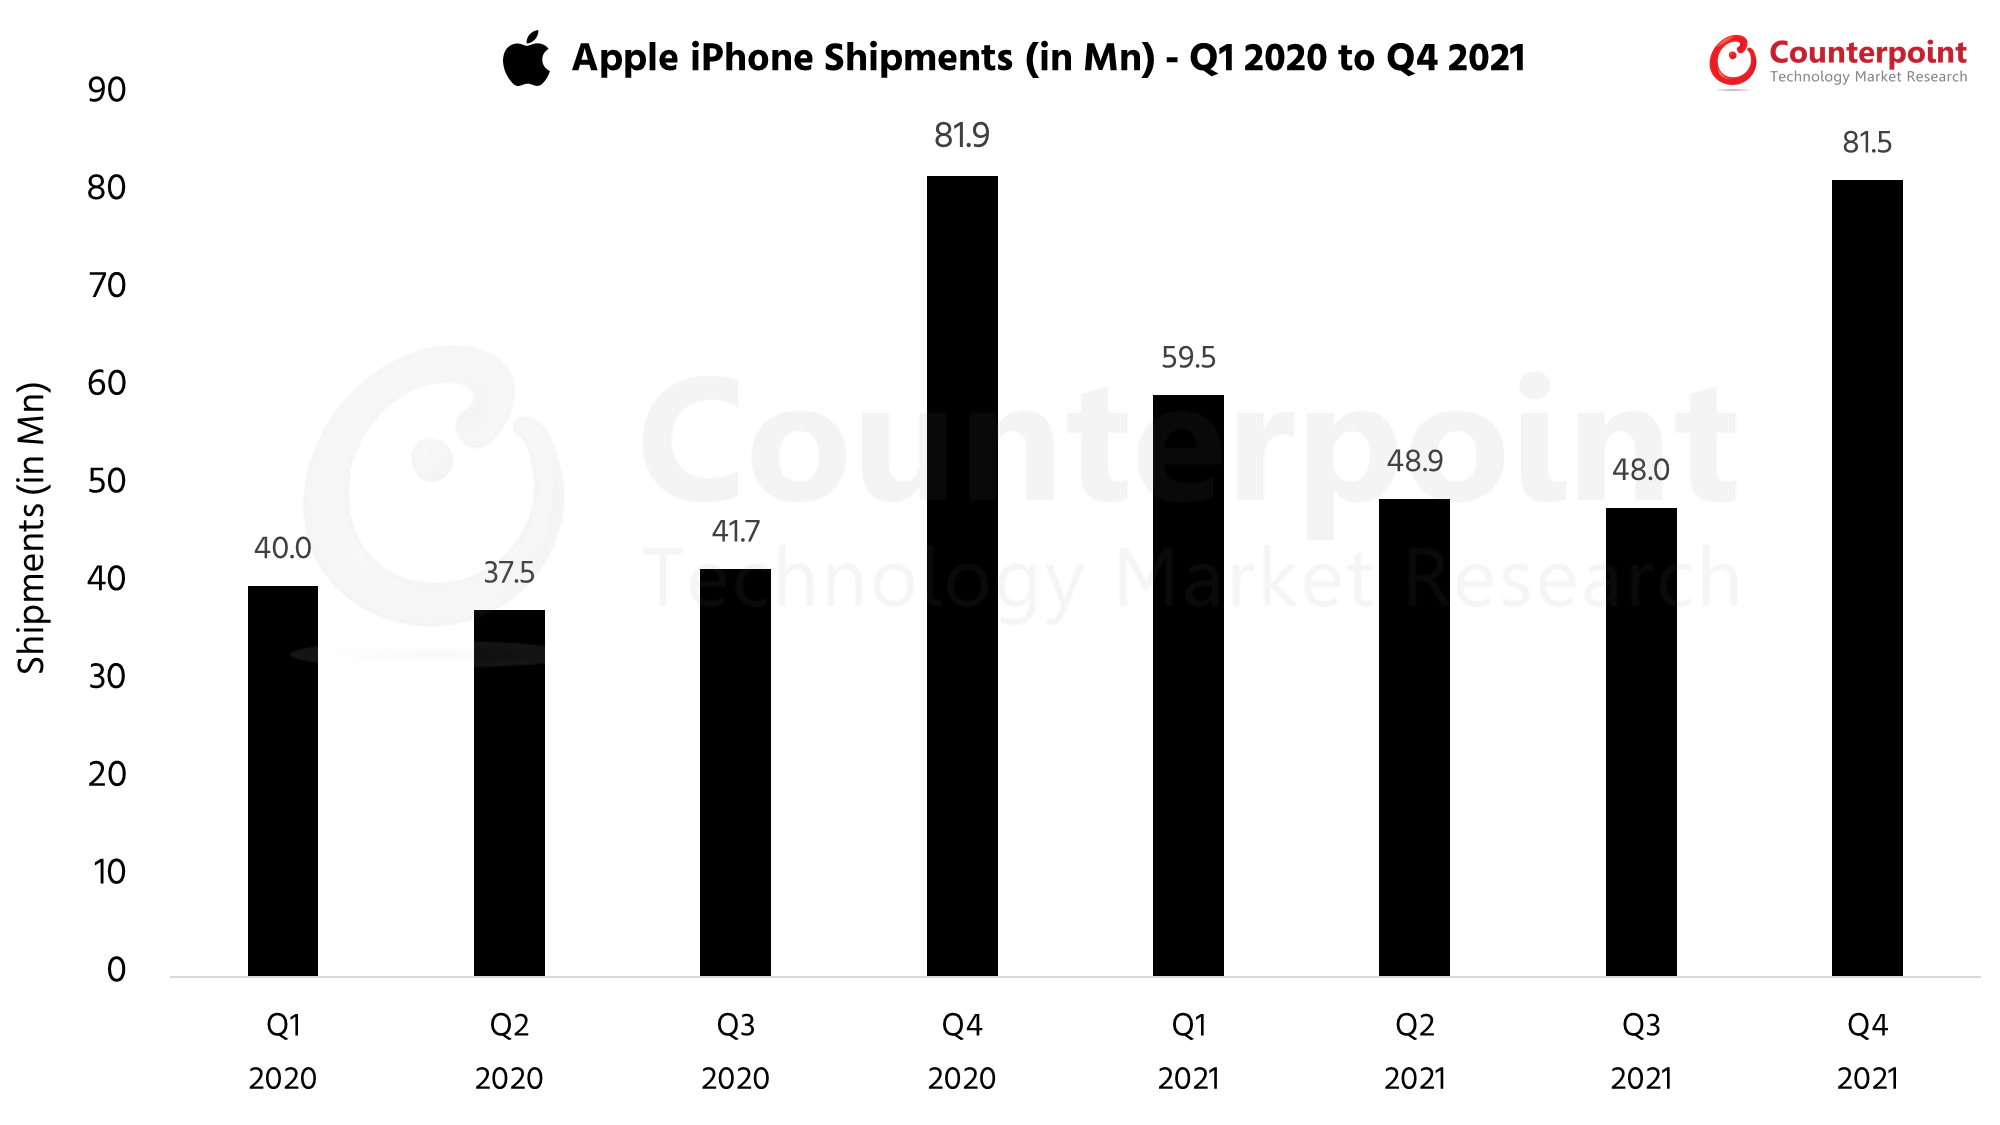 Apple Market Share - Counterpoint Research